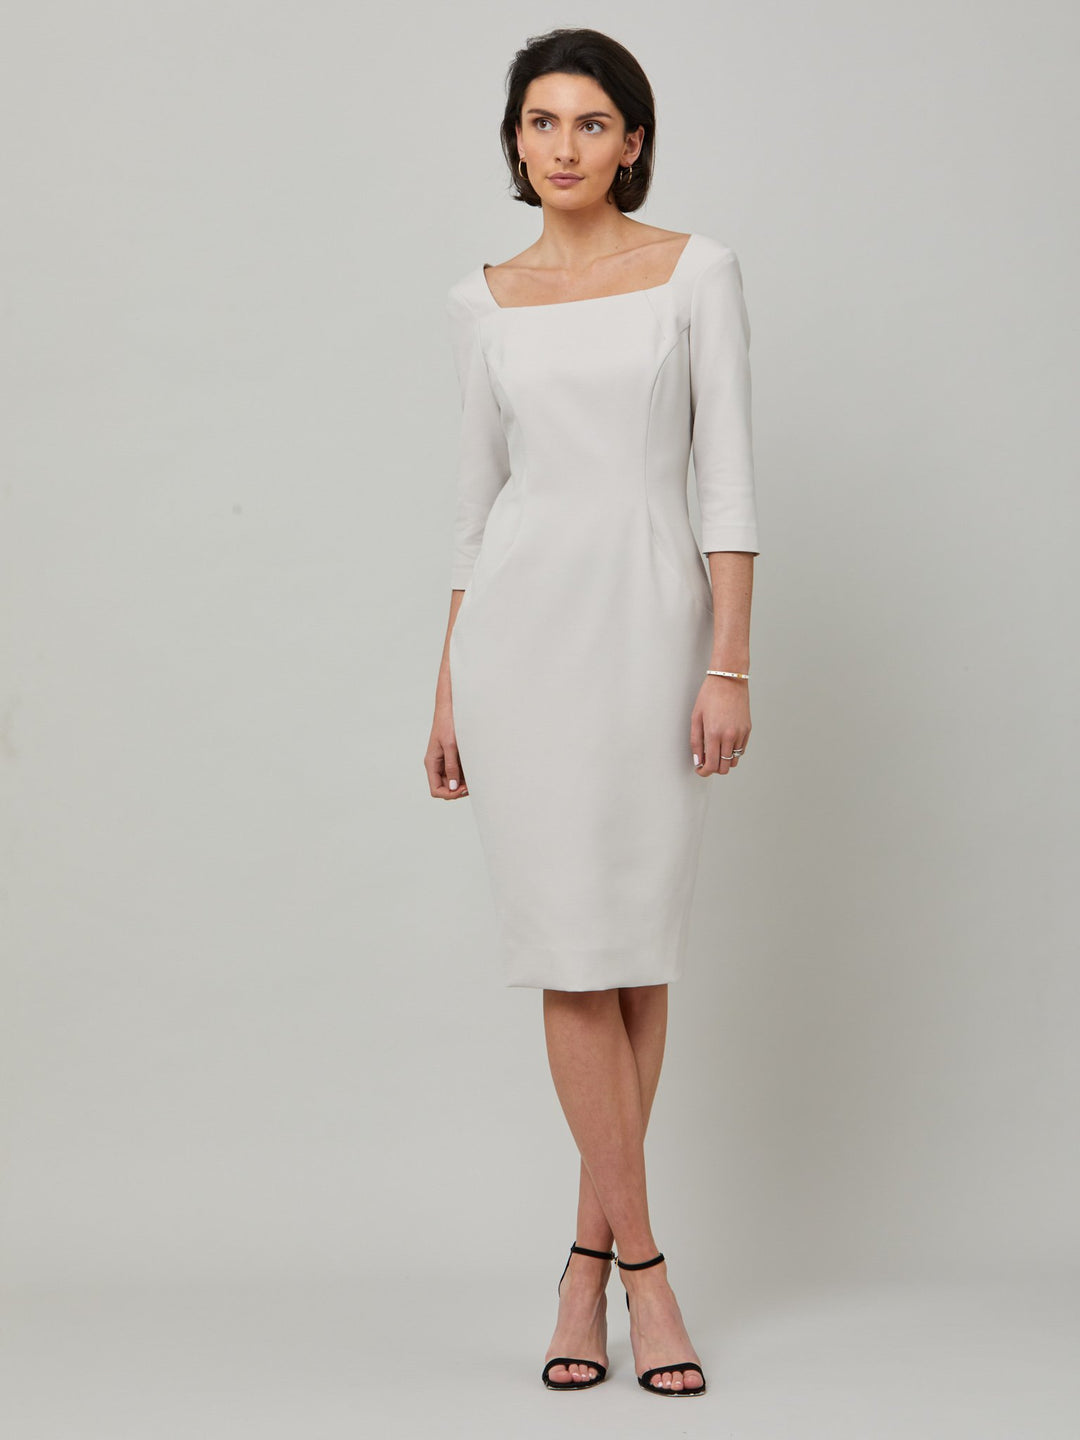 Introducing Mia, a body-skimming dress in a sophisticated latte. The dress features a flattering square neck and falls to a demure finish below the knee. Simple and refined elegance at its best. Attending a summer wedding? Mother of the bride? Heading to the races? This is the dress for you.